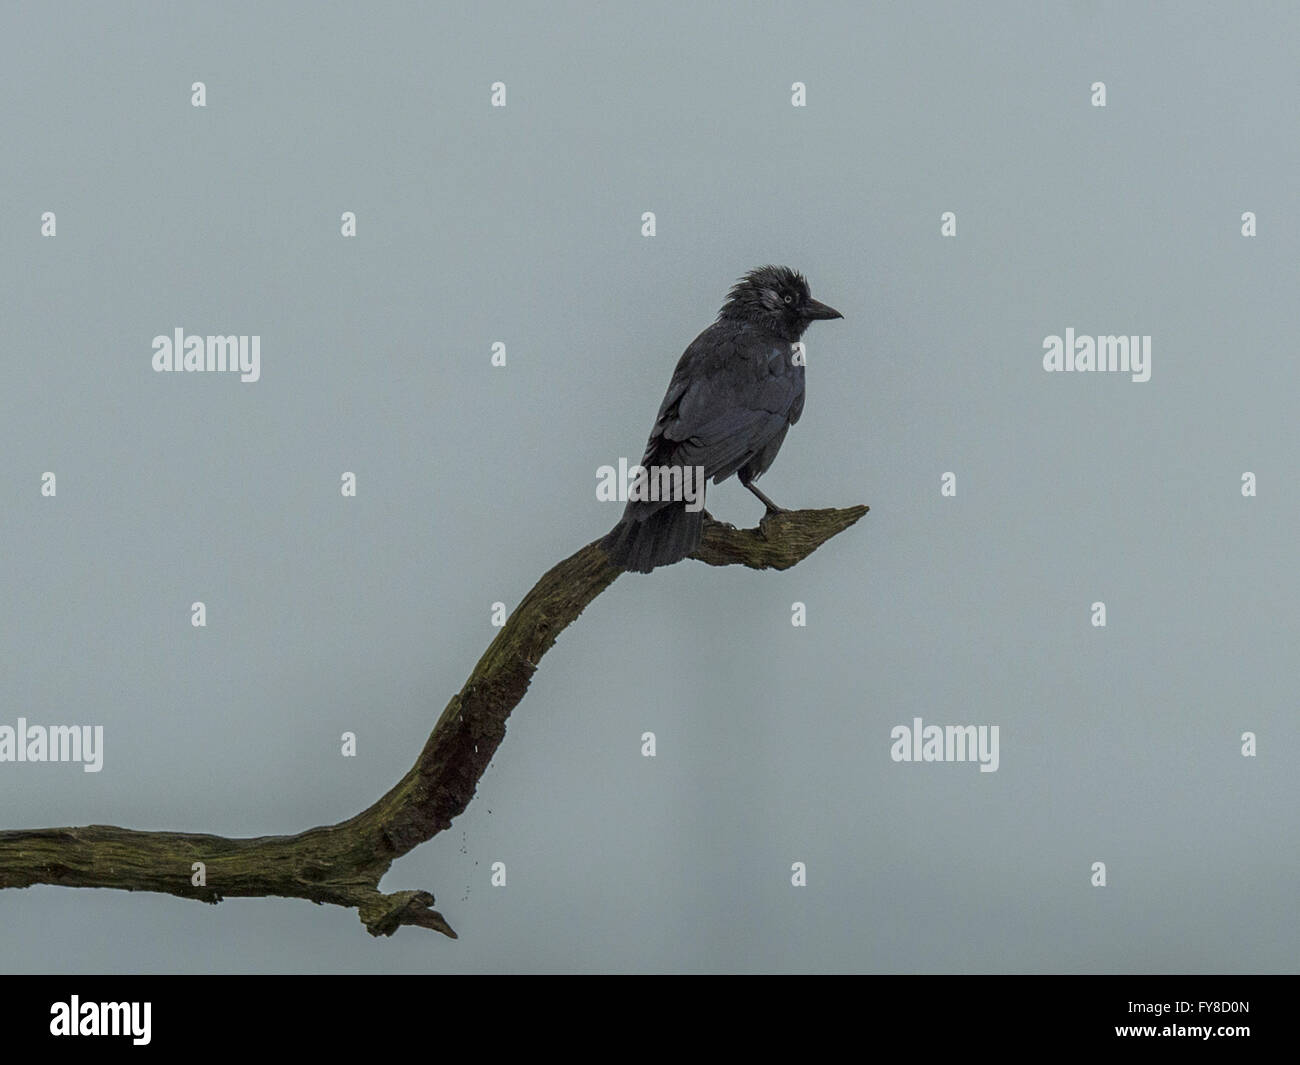 Jackdaw (Corvus monedula) on branch silhouette against grey sky background. Stock Photo